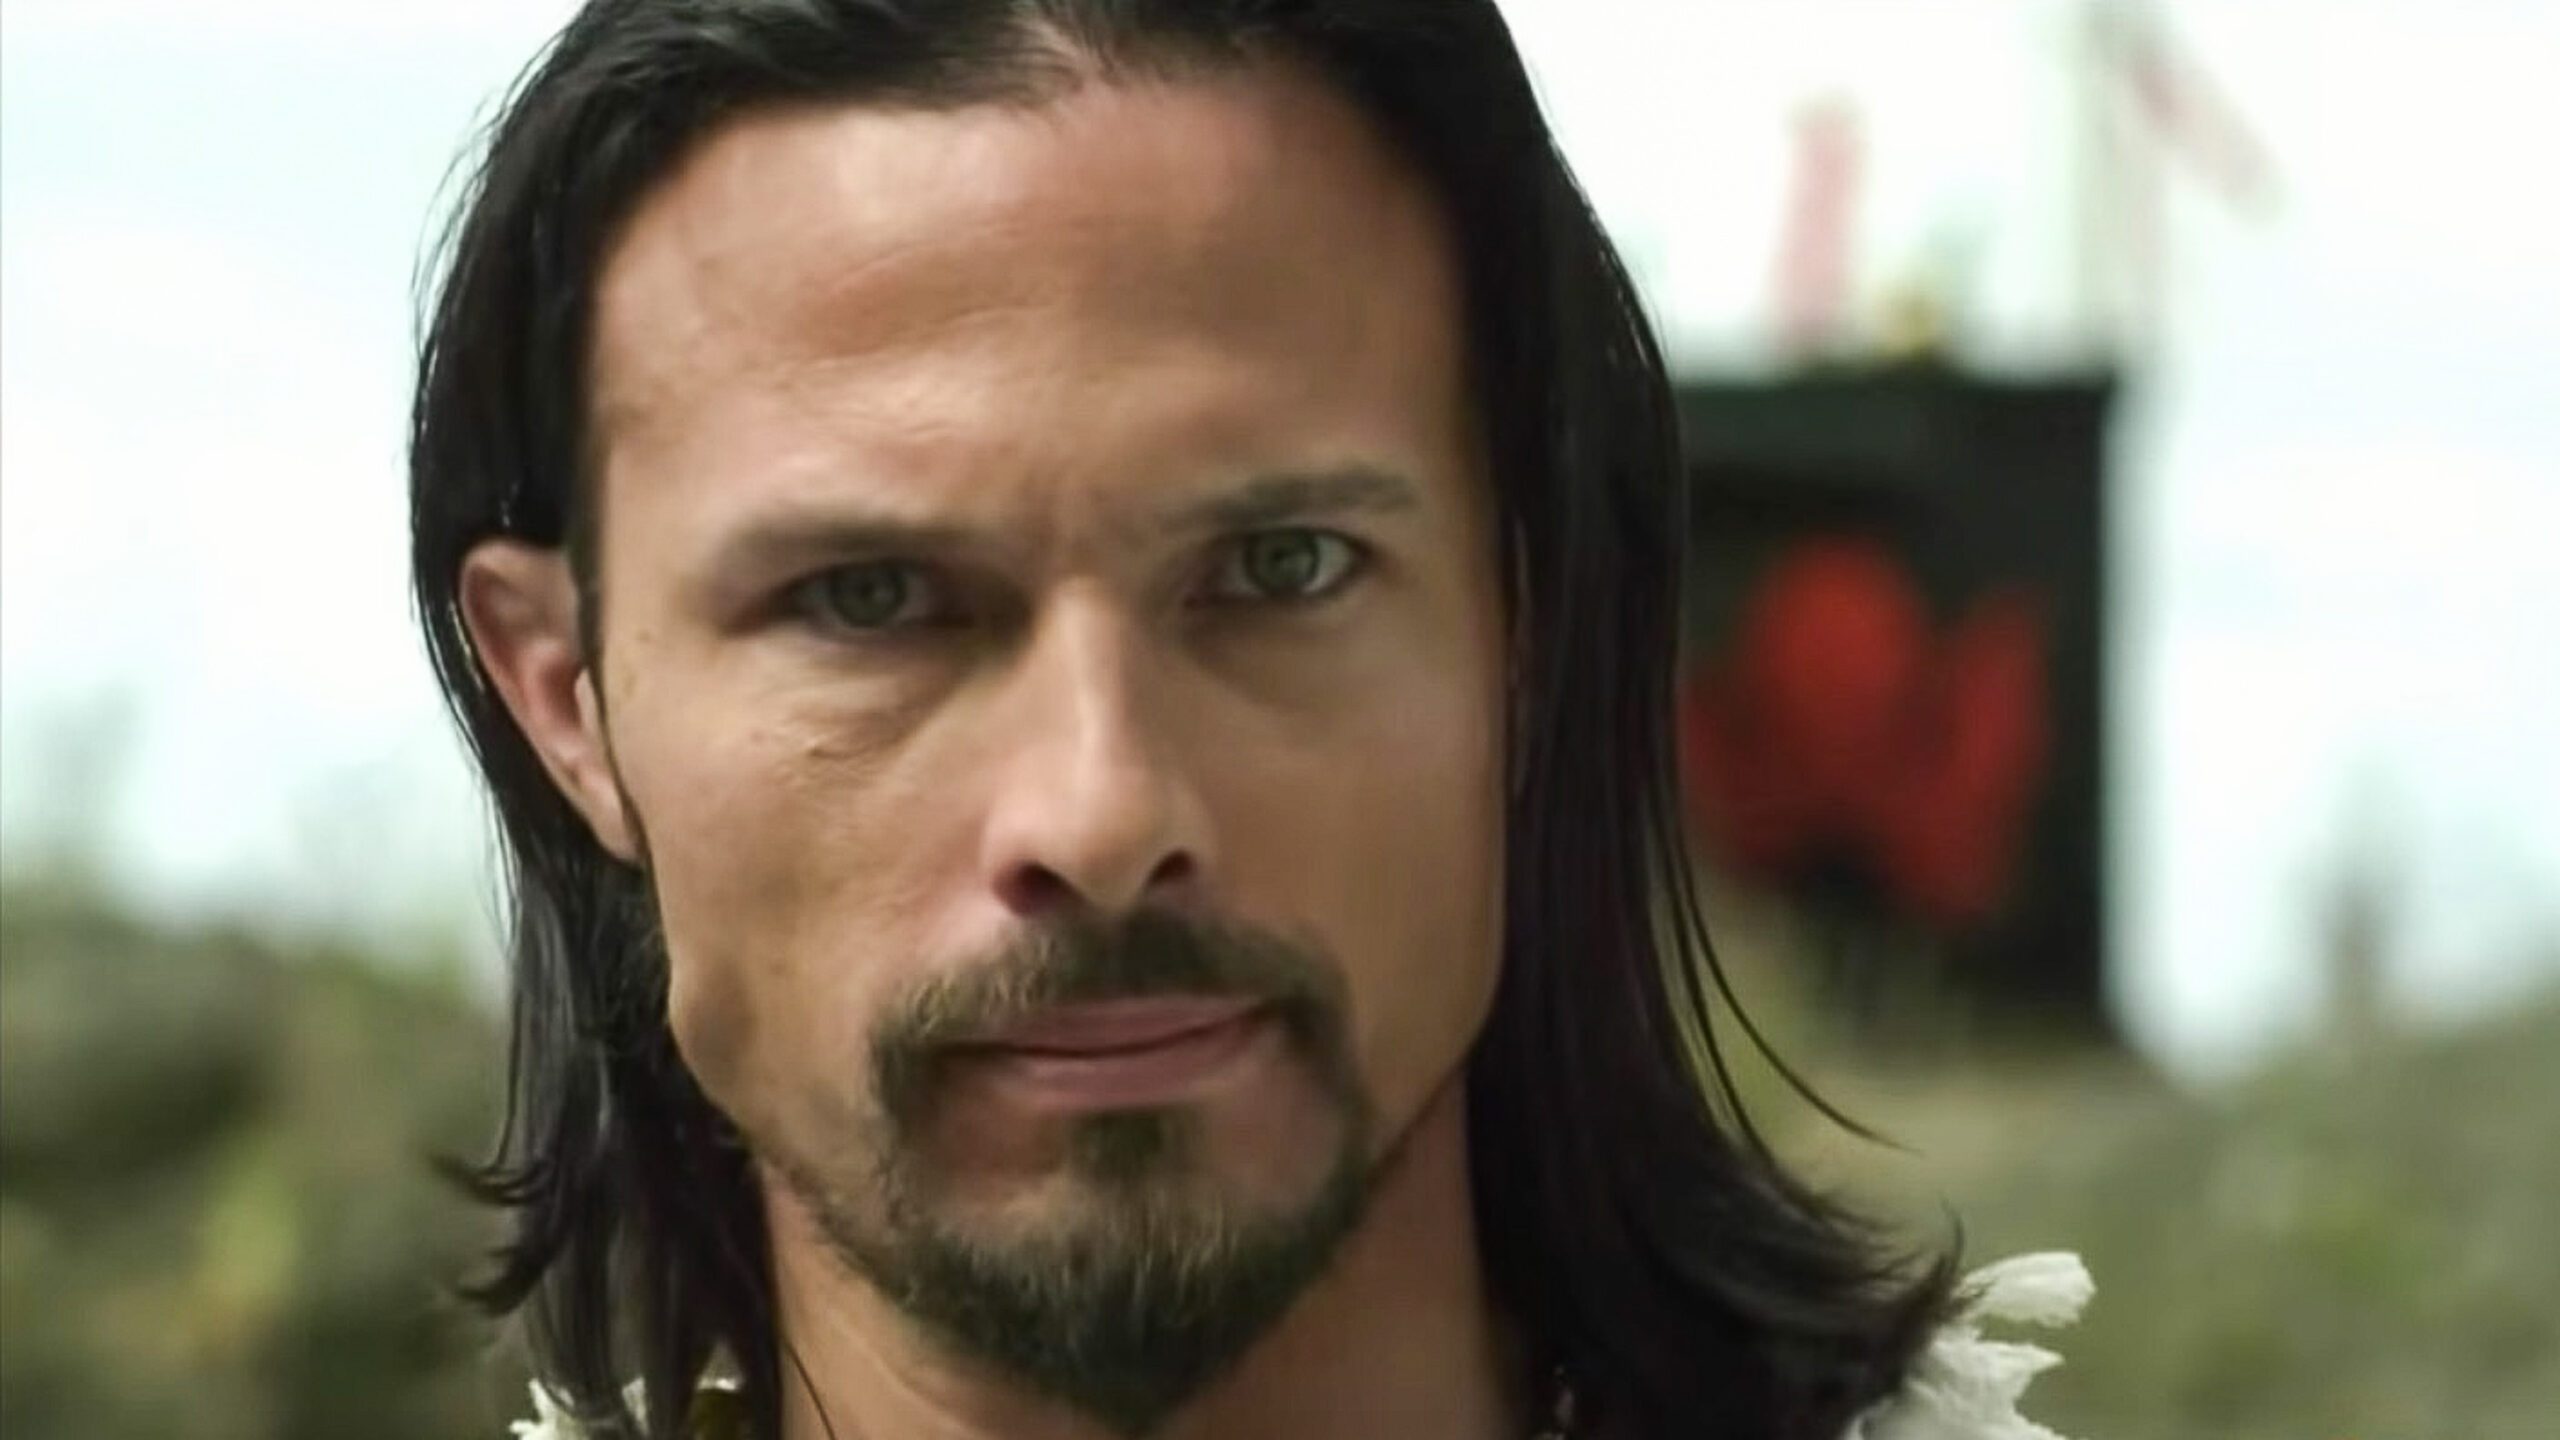 ‘Power Rangers’ actor pleads guilty to stabbing roommate with sword